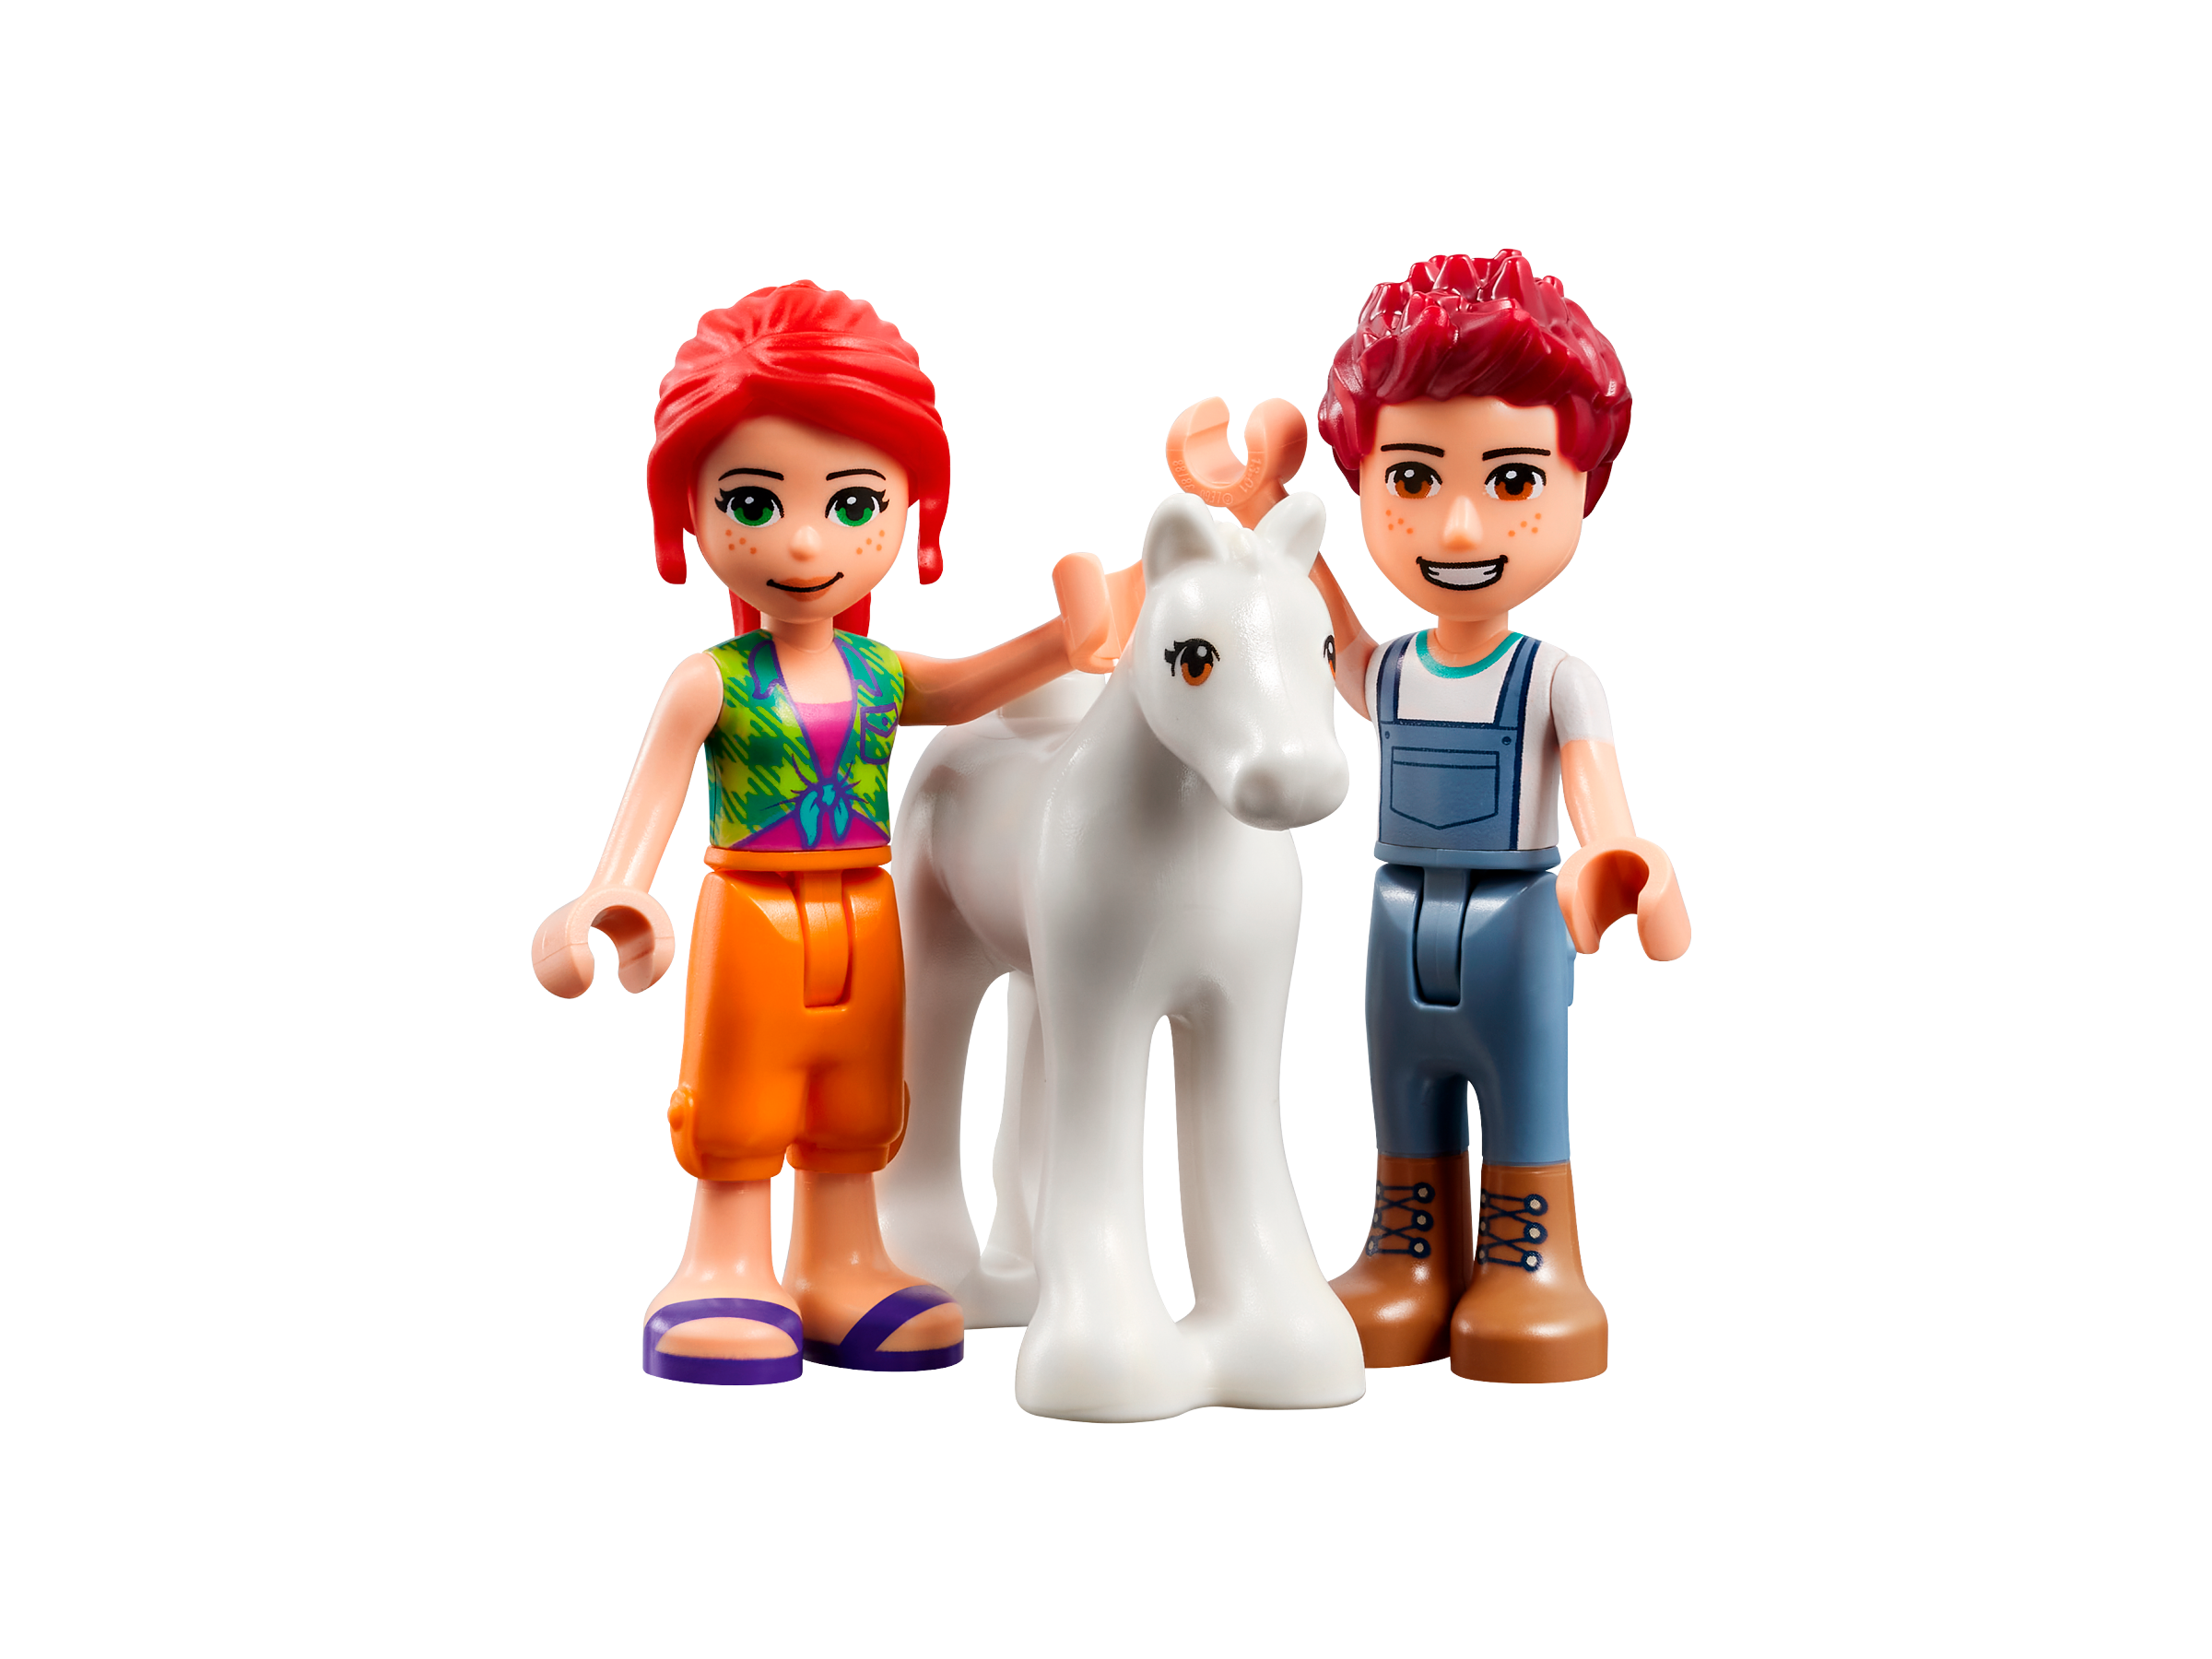 Pony-Washing Stable 41696 | Friends | Buy online at the Official LEGO® Shop  US